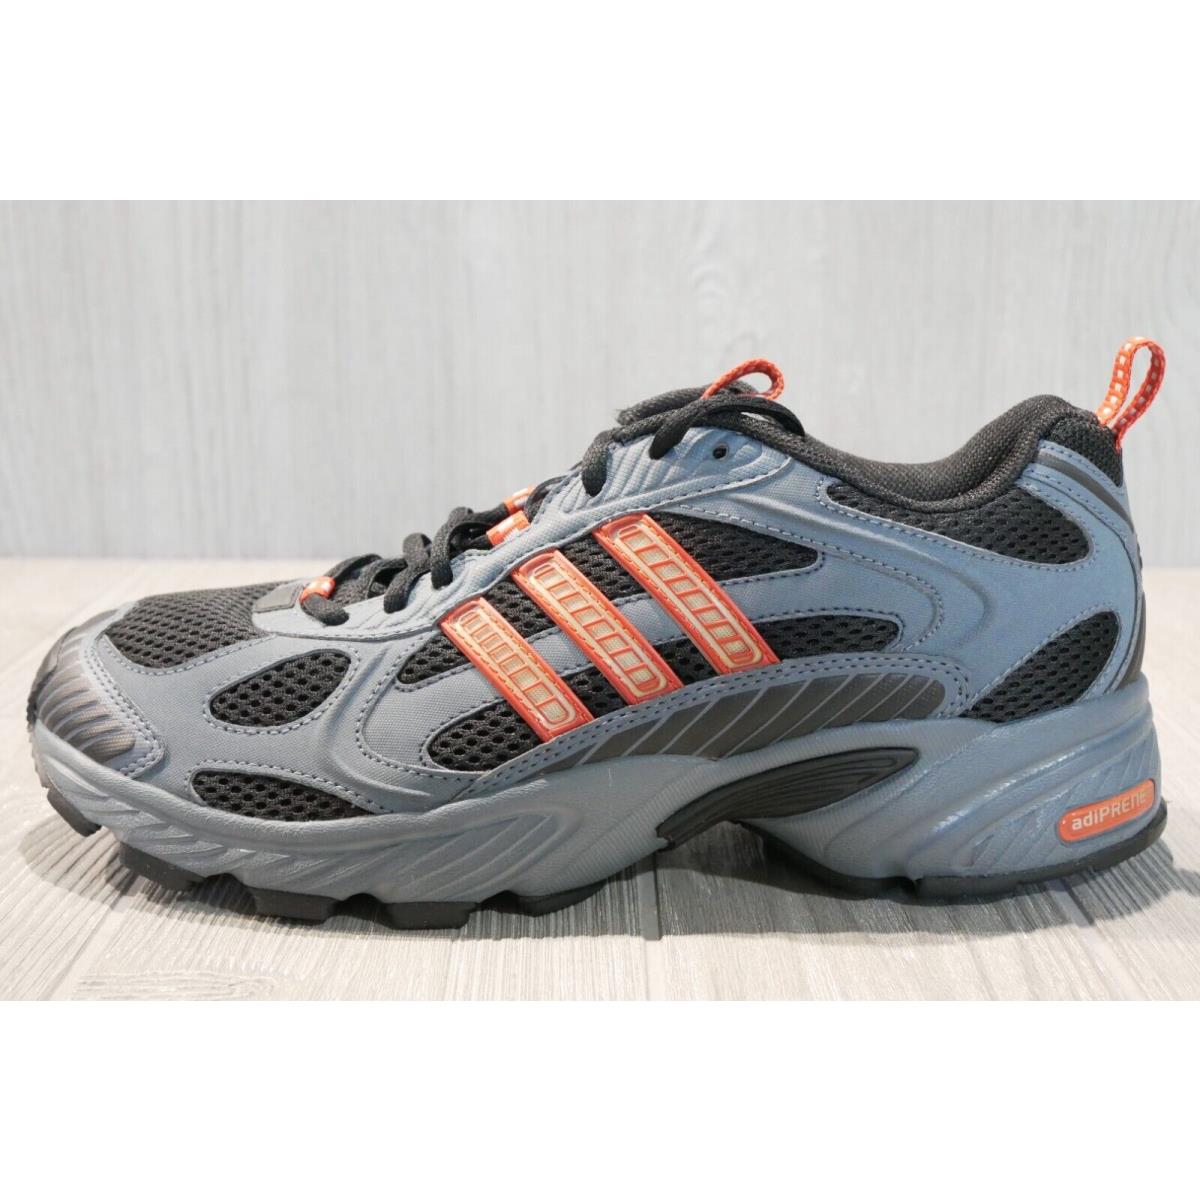 Careful reading Silently Cereal Vintage Adidas Boreal Trail Running Shoes 2007 Mens Size 9.5 11 Oss |  692740547350 - Adidas shoes Running - grey | SporTipTop